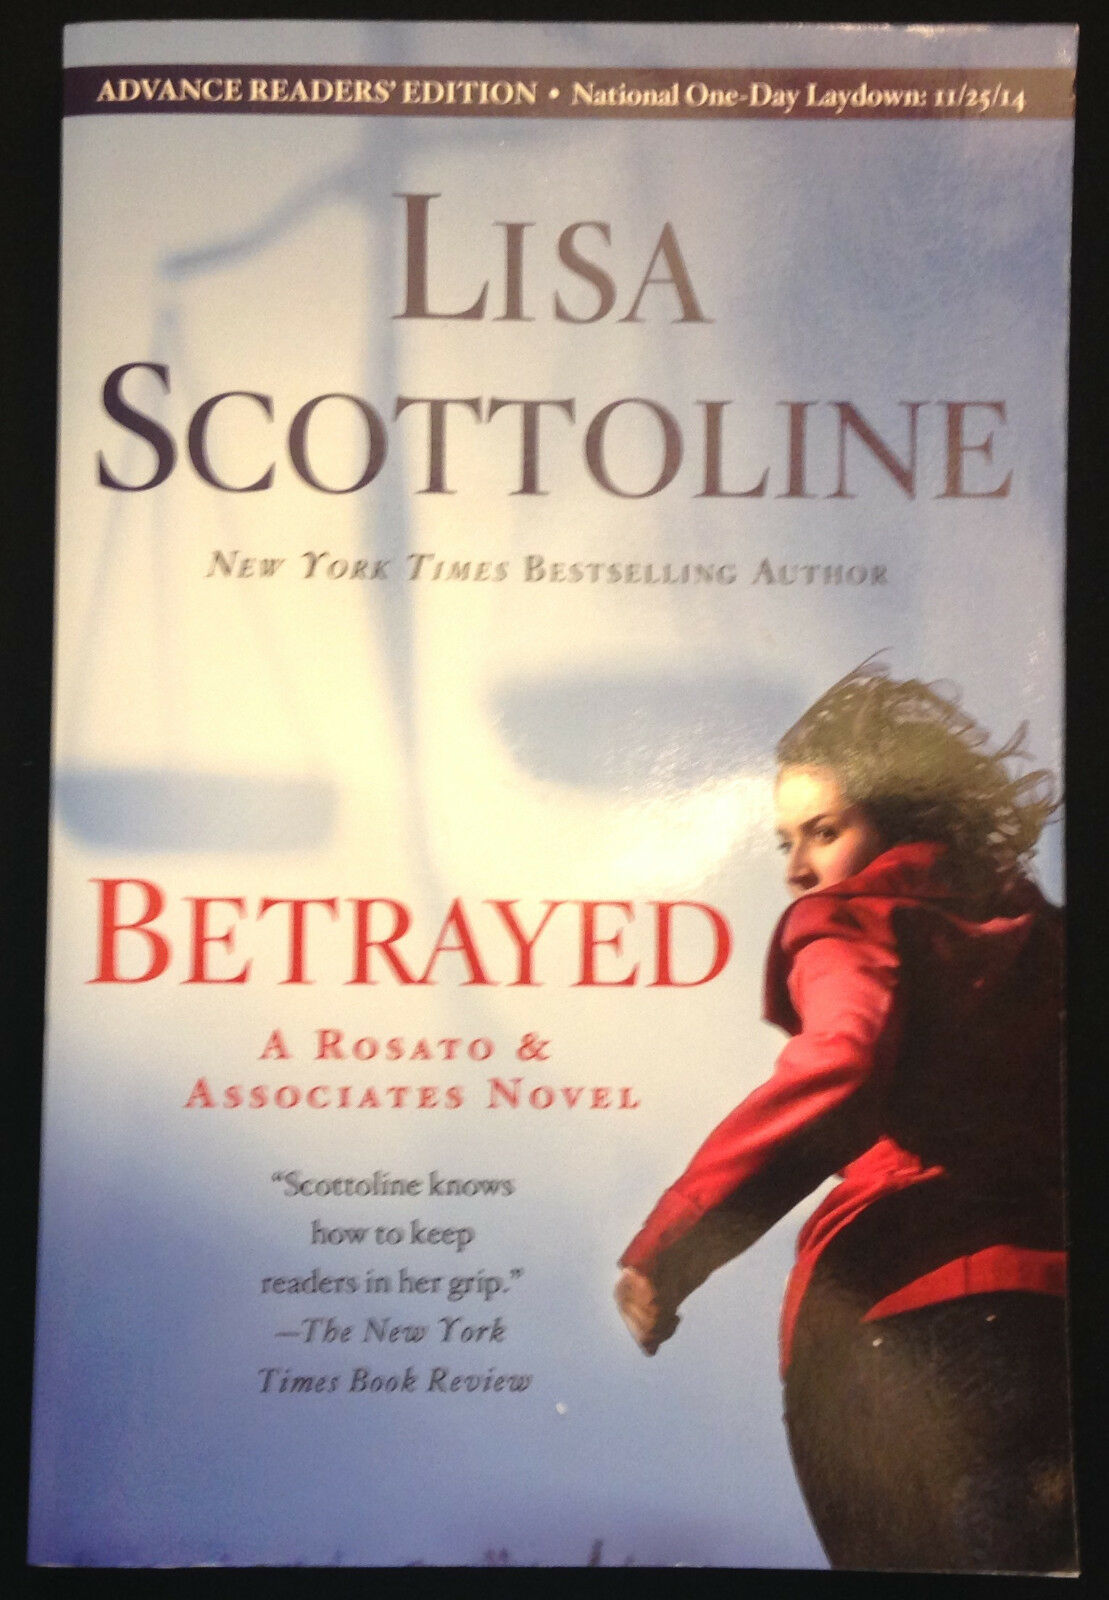 Primary image for Betrayed, Lisa Scottoline, NM, ARC Advance Reader Copy